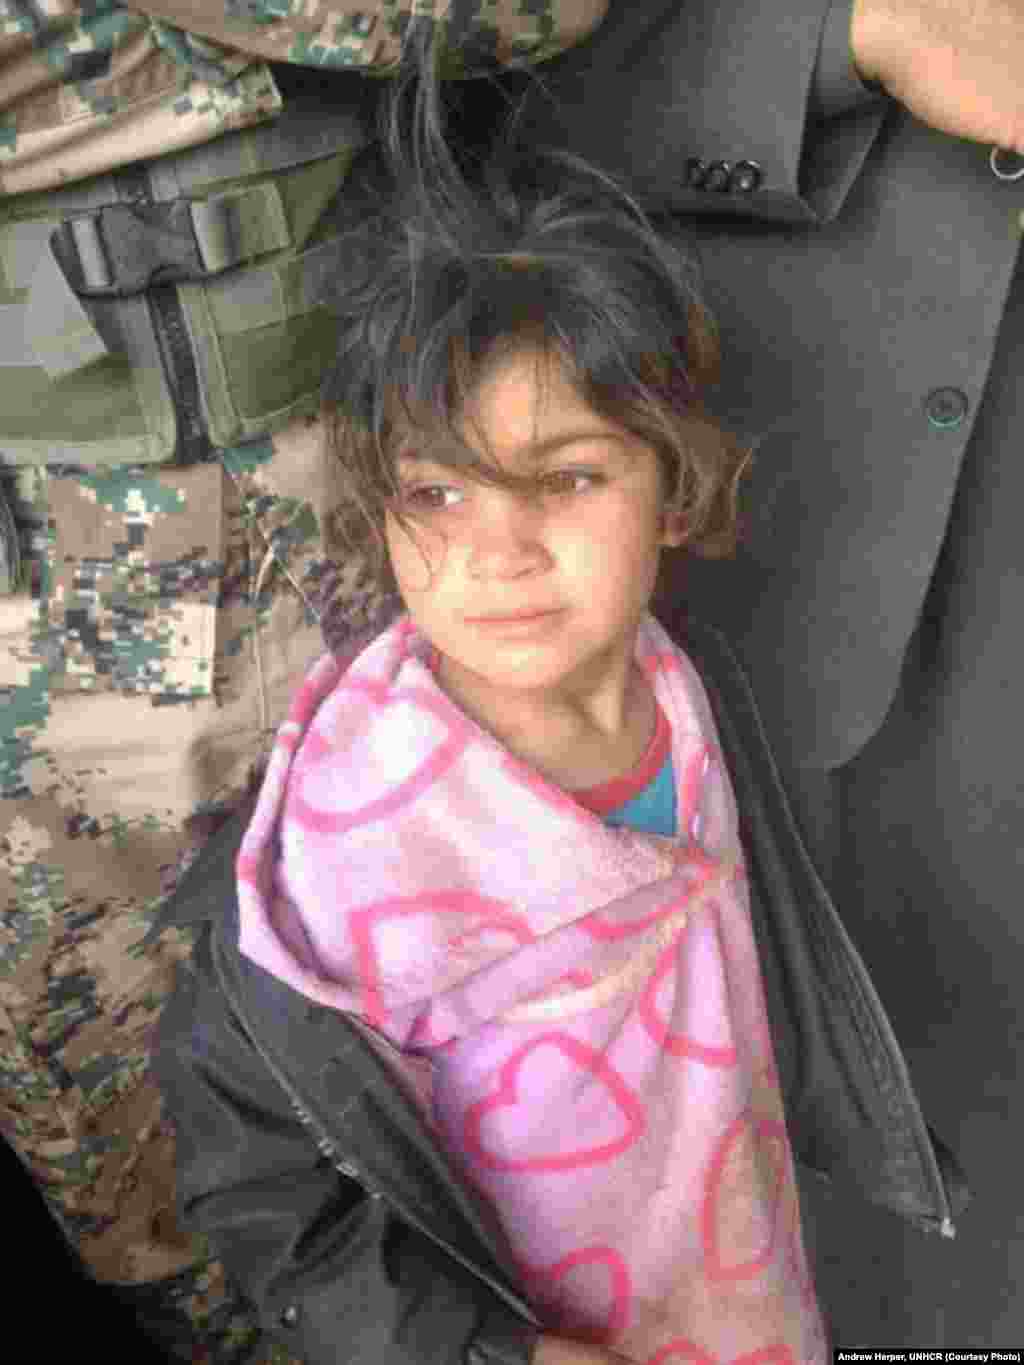 Rasha, age 8,fled Homs in her pajamas after her house was shelled. She travelled for 12 days to reach the Jordan border.